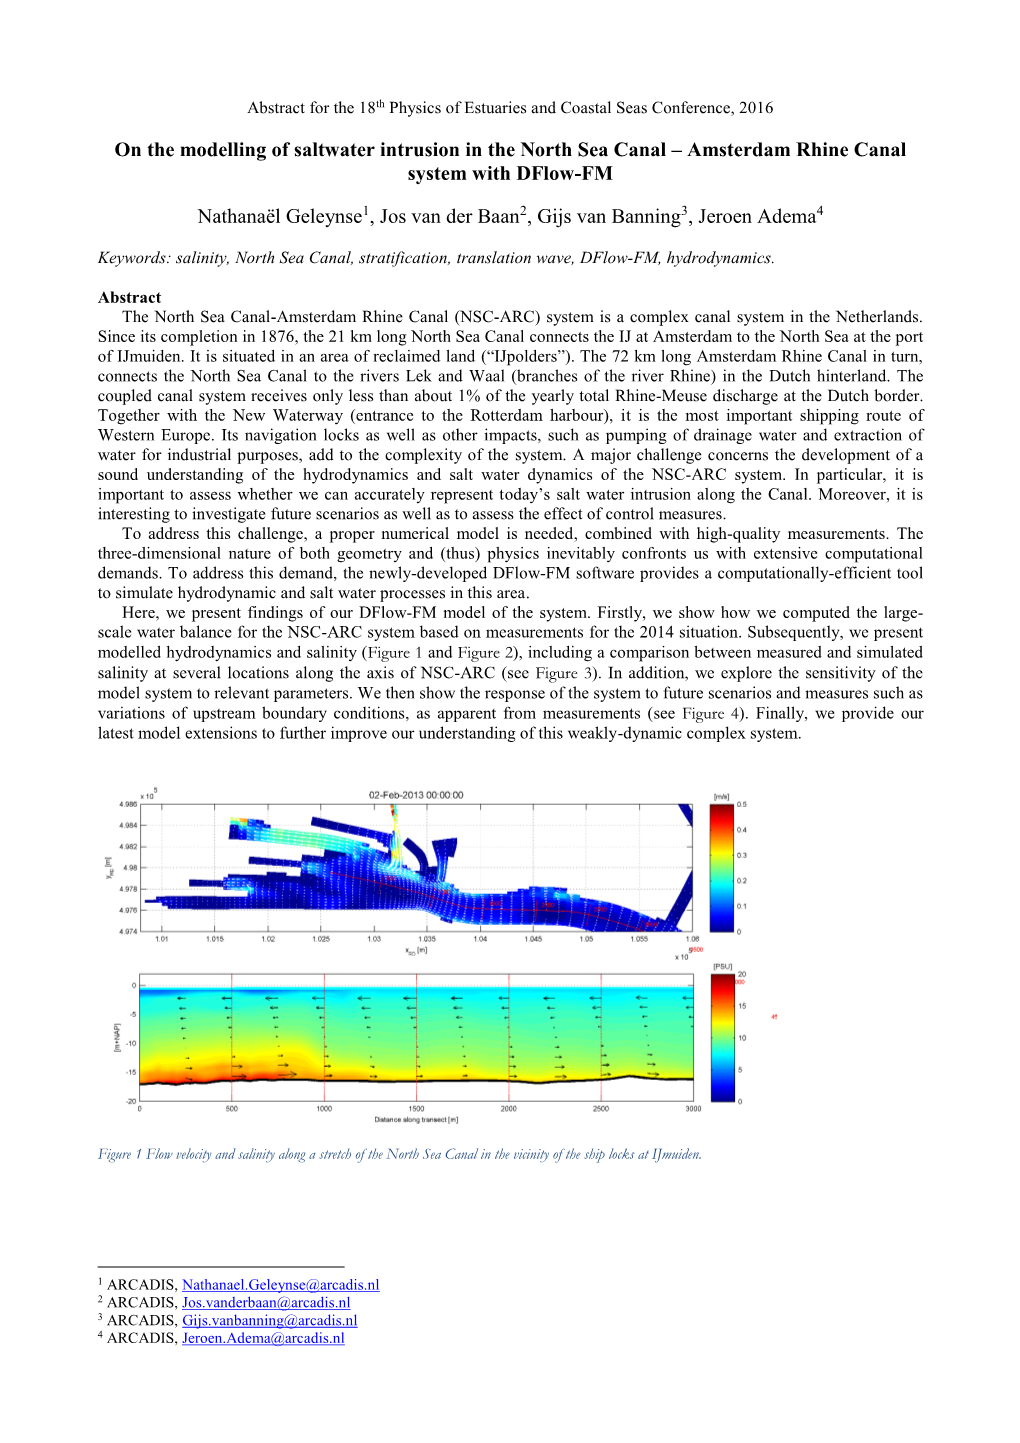 On the Modelling of Saltwater Intrusion in the North Sea Canal – Amsterdam Rhine Canal System with Dflow-FM